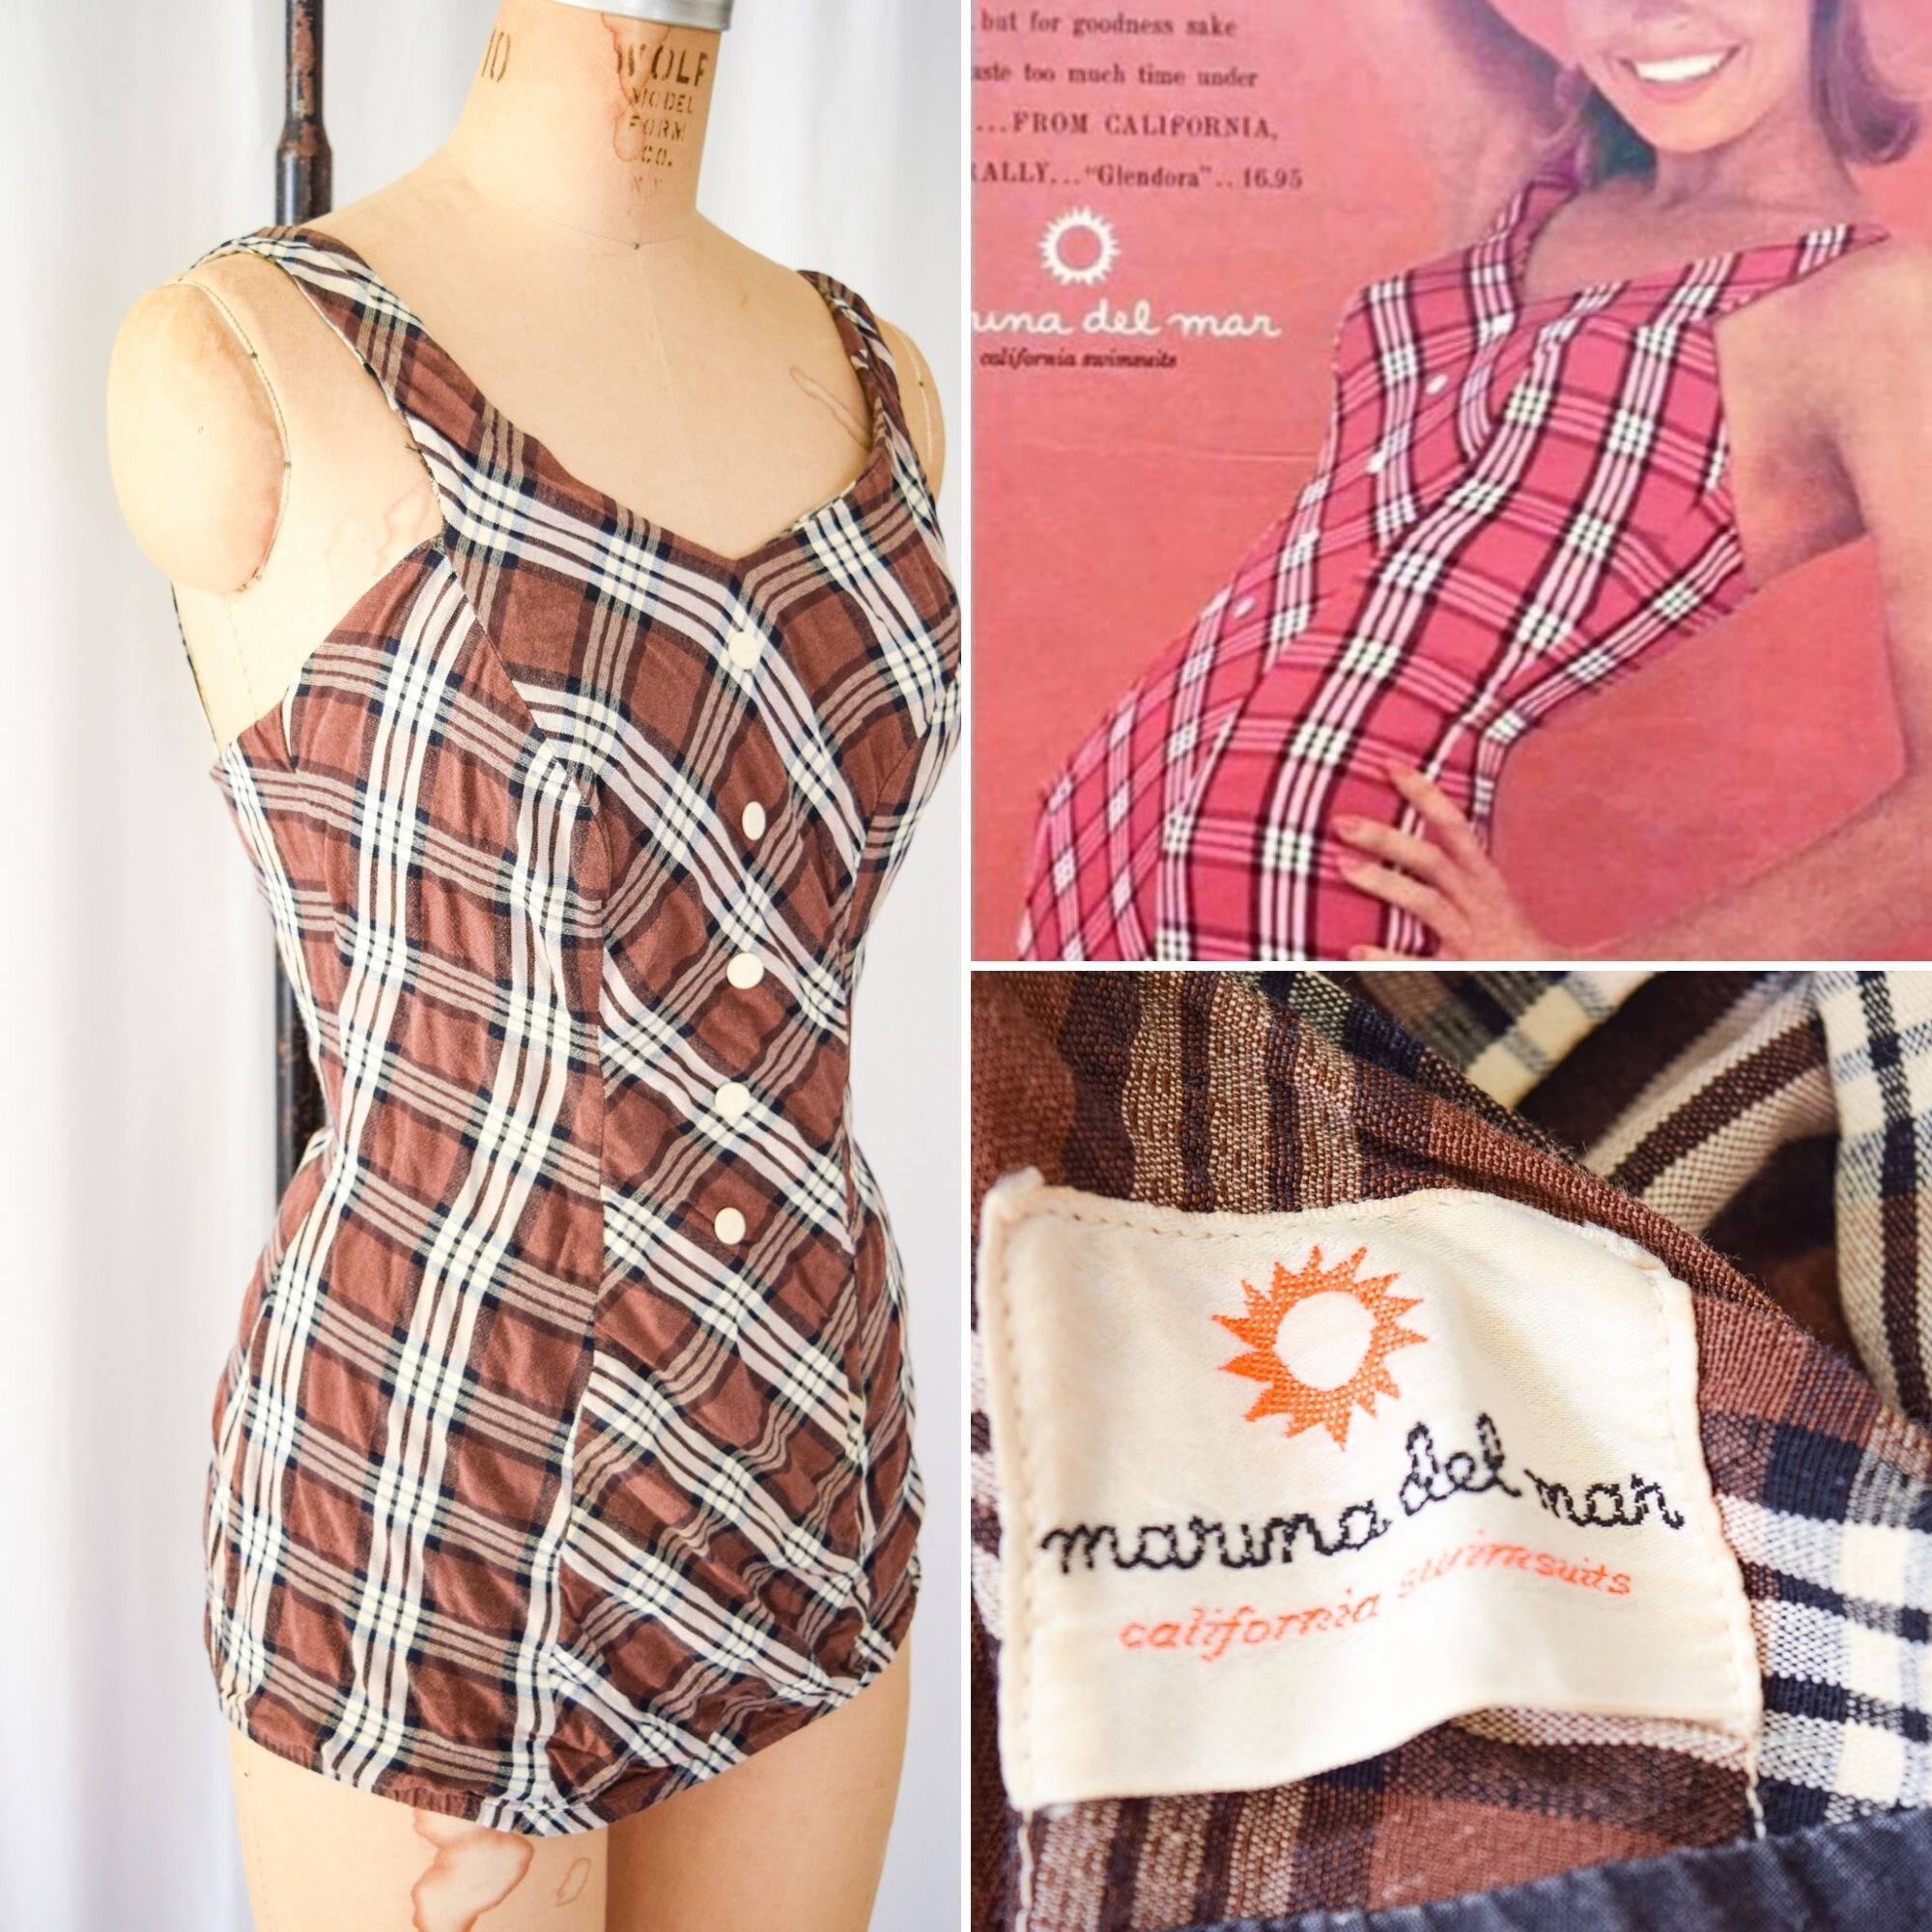 Marina del Mar. Vintage 1950s Brown Plaid One Piece Swimsuit Documented —  Bobbins & Bombshells